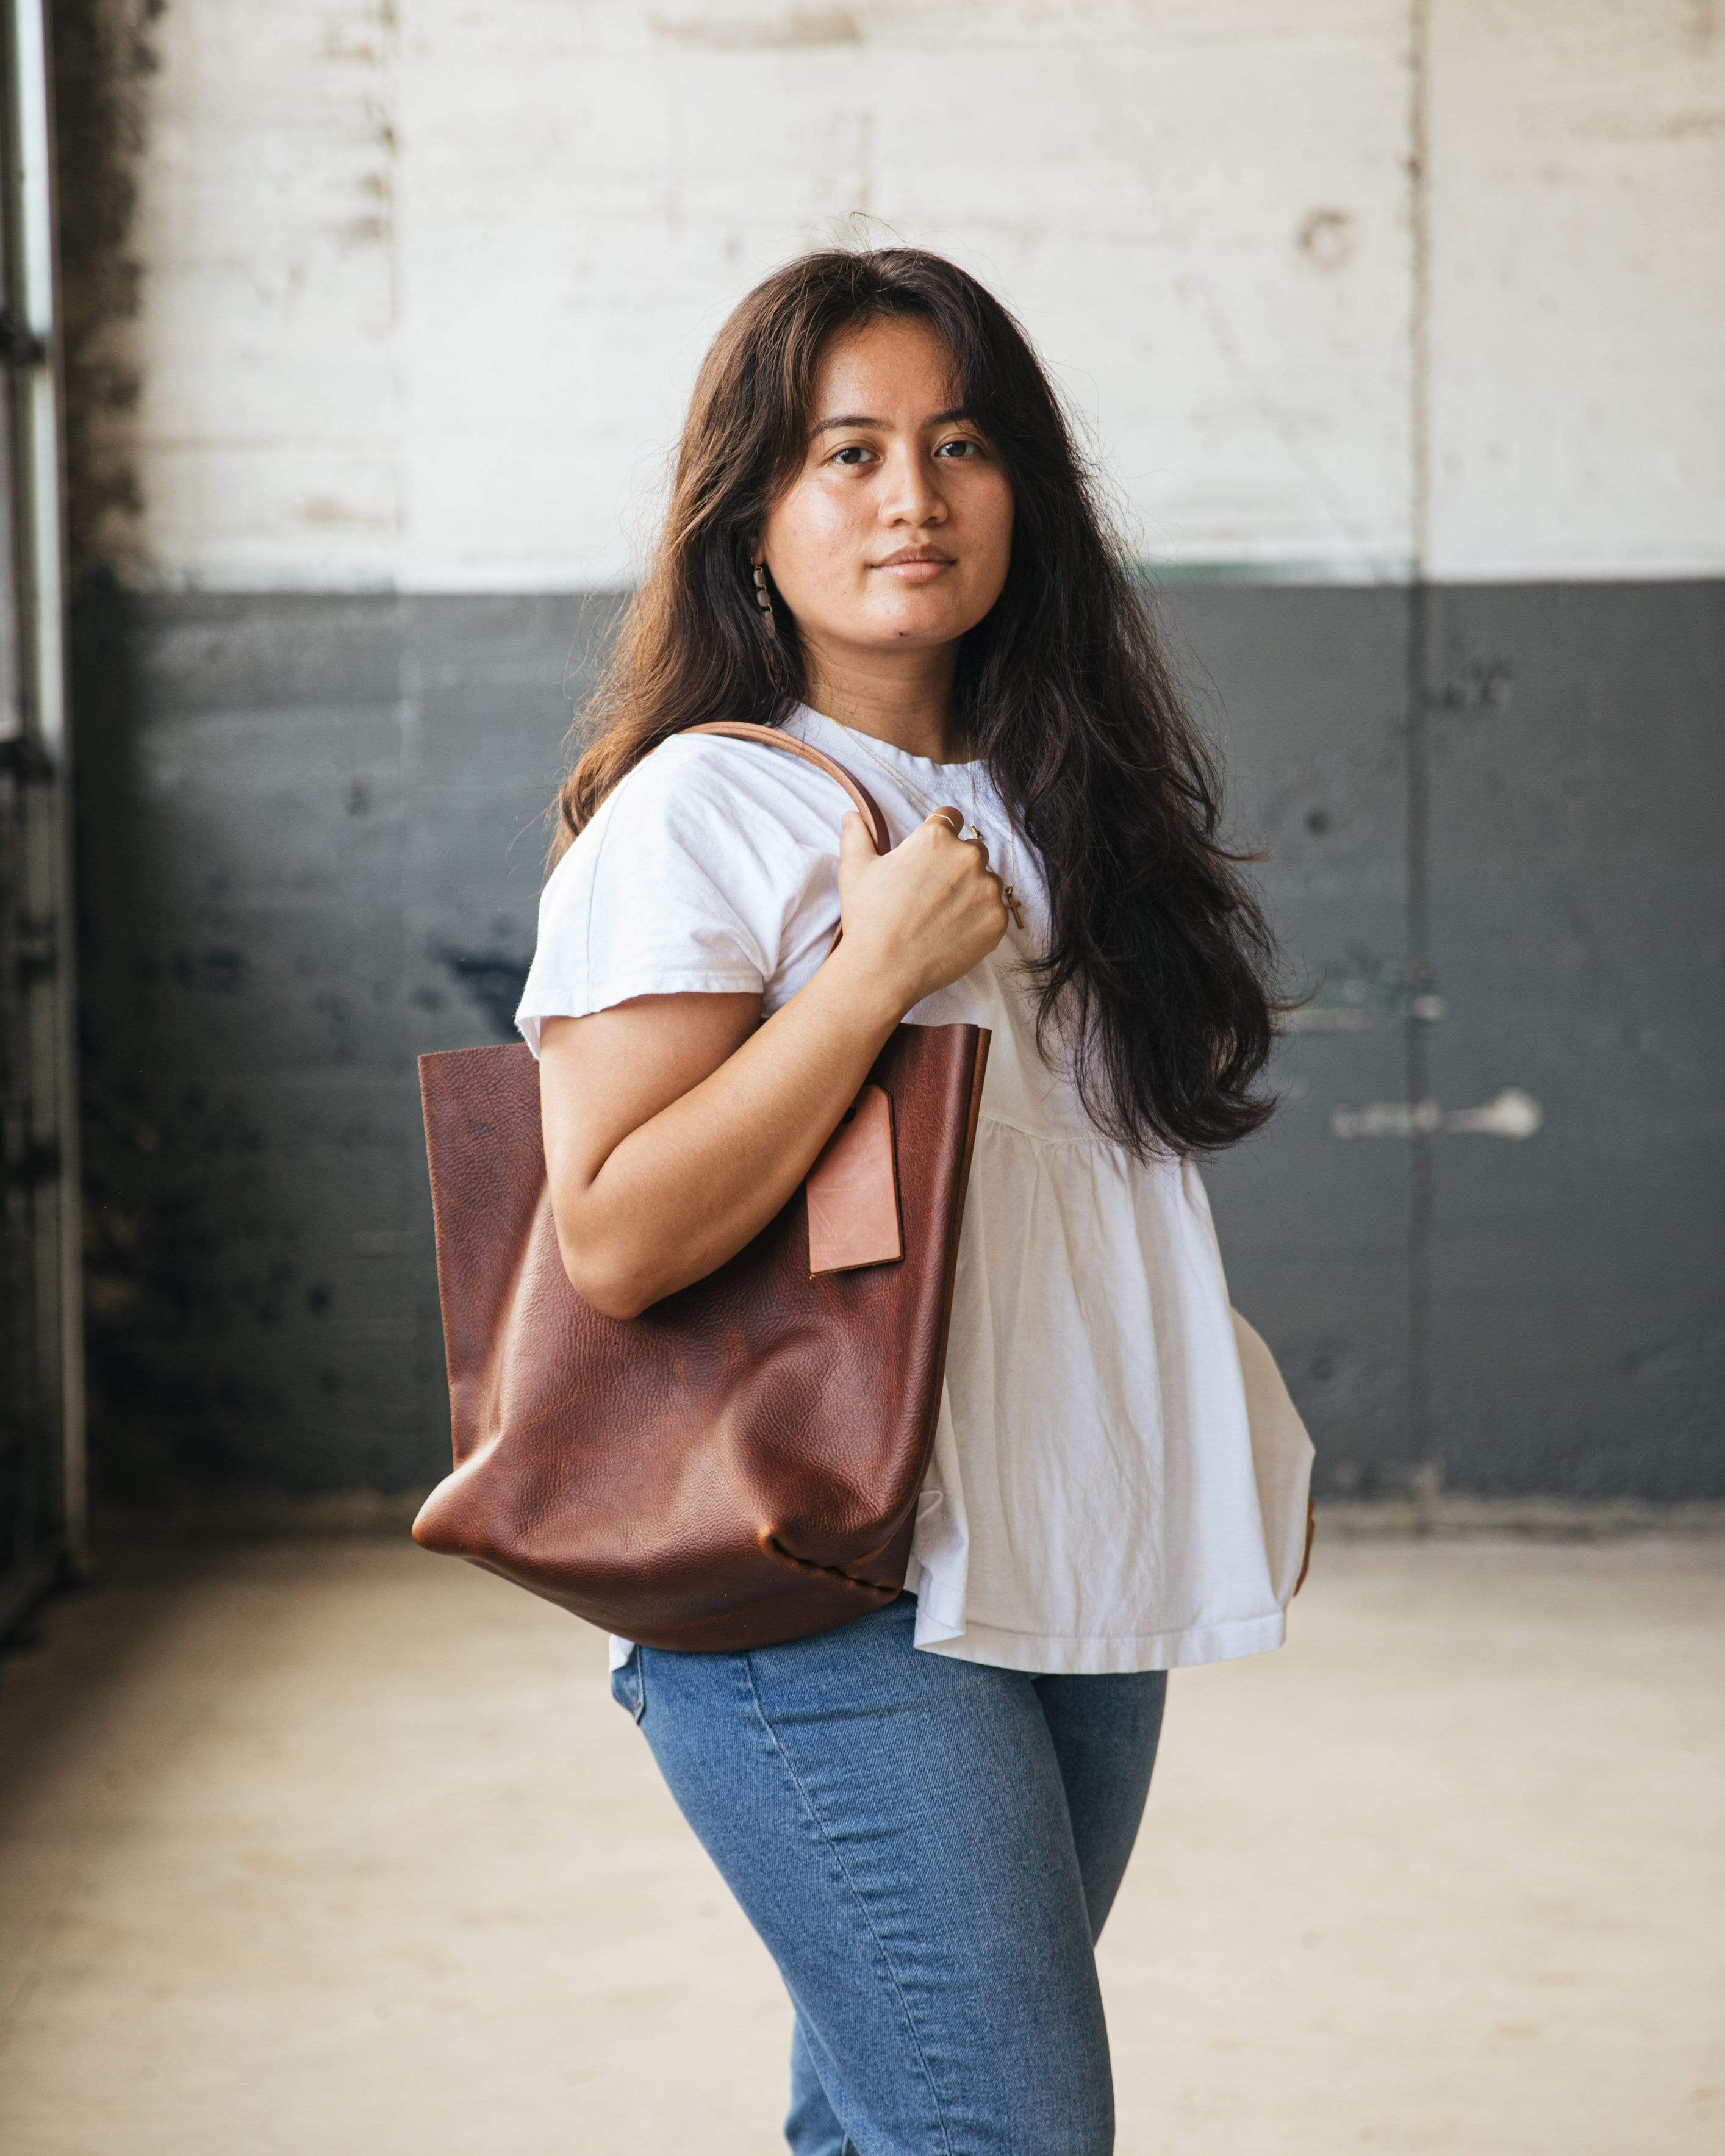 Leather Tote Bag: Red Kodiak Tote | Leather Handbags Made by KMM & Co. 11-inch +$25 / Crossbody Strap (FINAL Sale) +$65